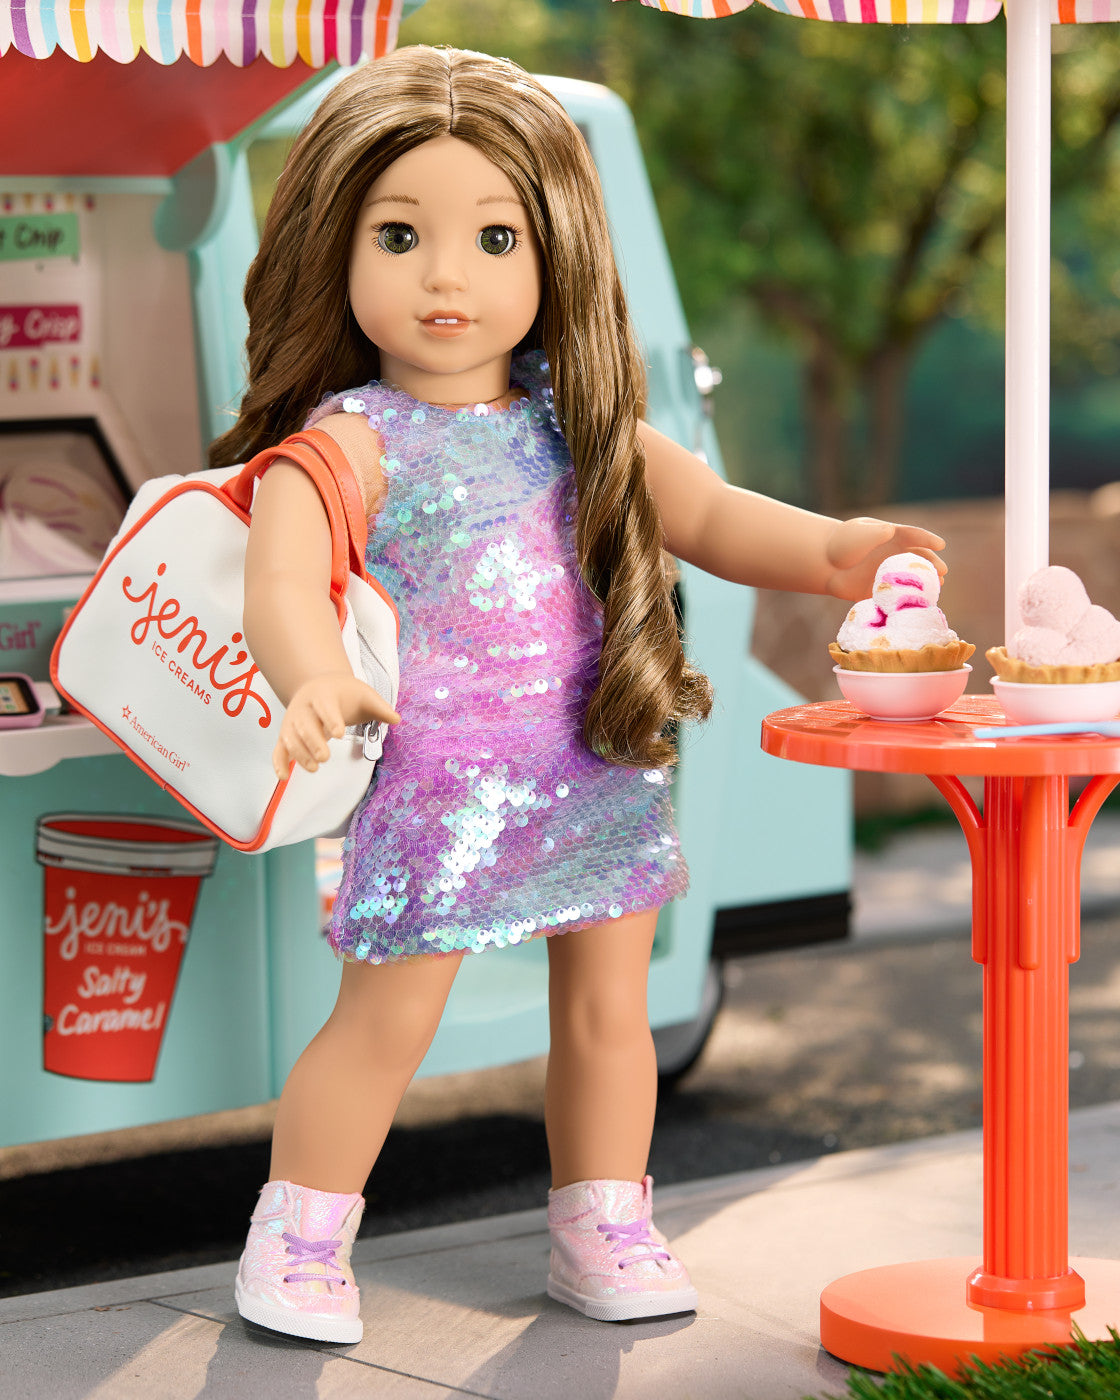 Jeni's and American Girl doll accessories